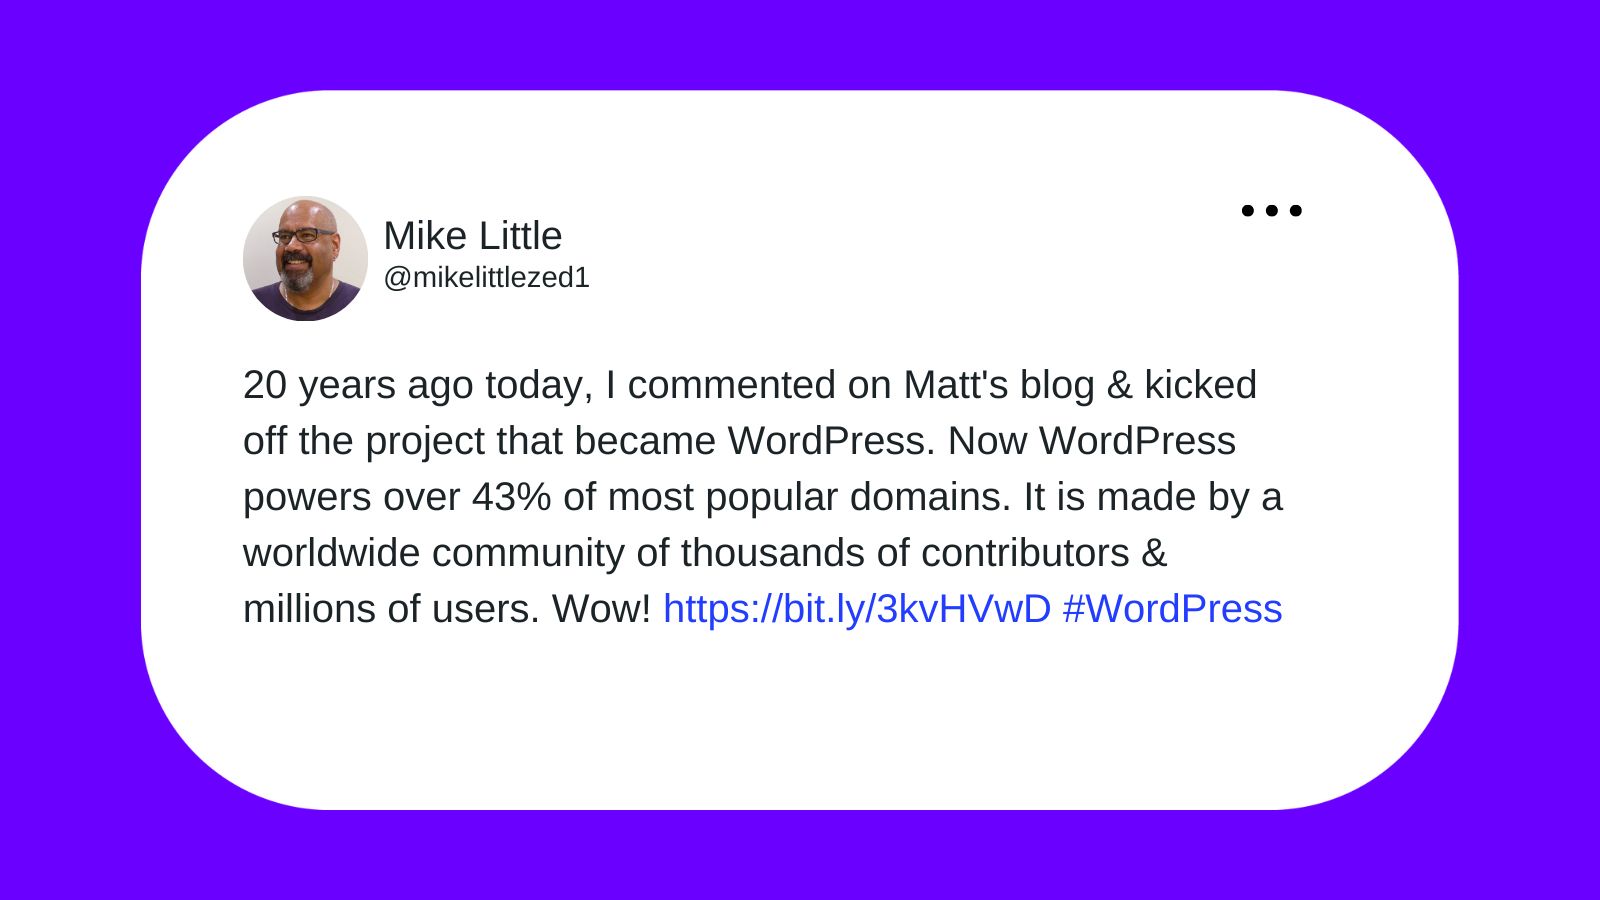 Mike Little tweeting "20 years ago today, I commented on Matt's blog & kicked off the project. that became WordPress. Now WordPress powers over 43% of most popular domains. It is made by a worldwide community of thousands of contributors & millions of users. Wow!"